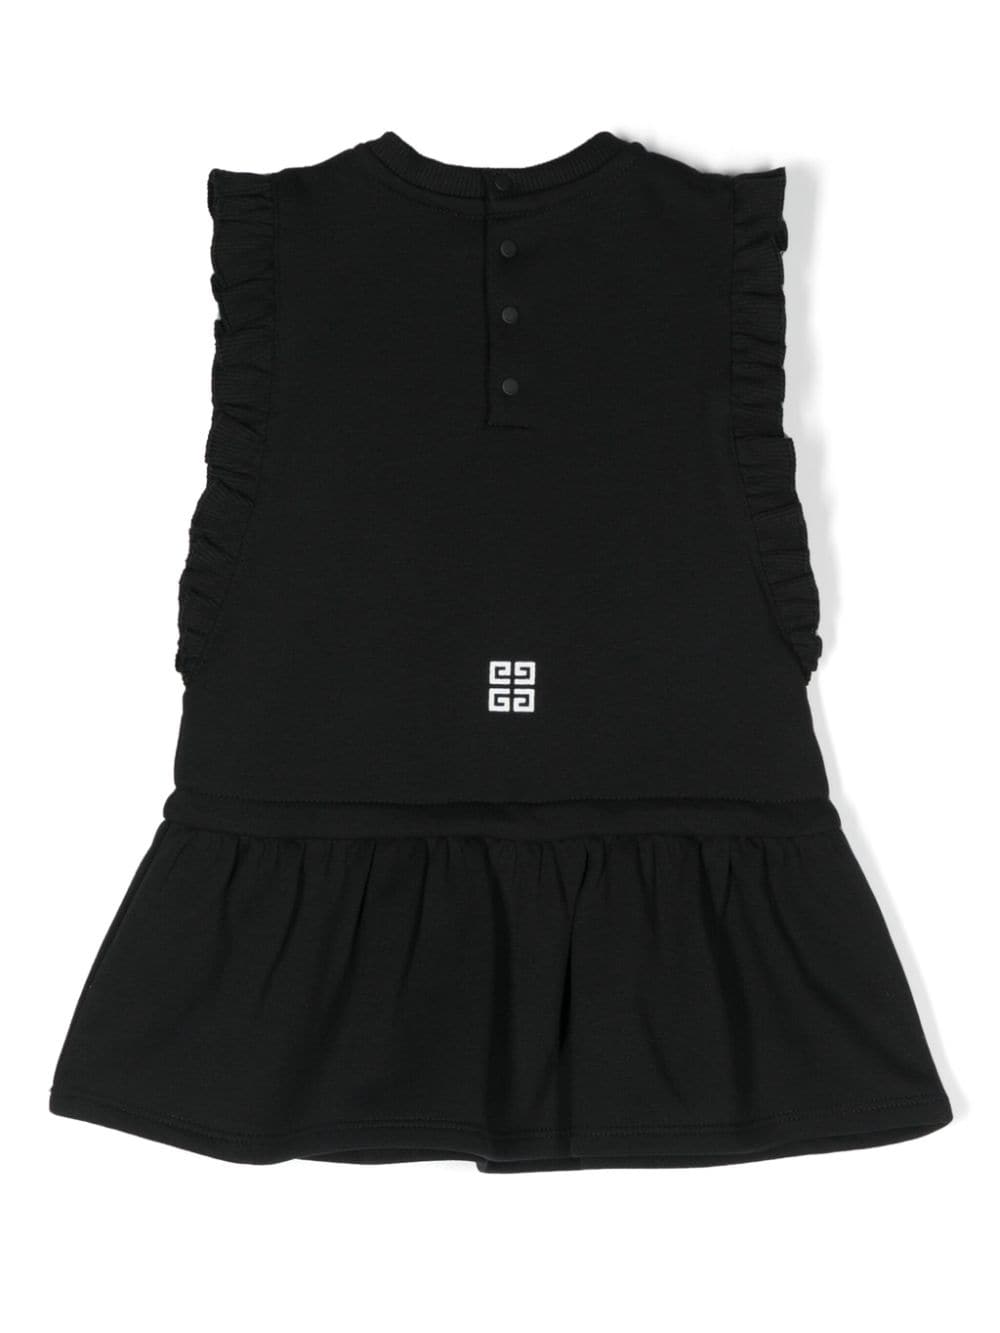 Black dress for baby girls with logo